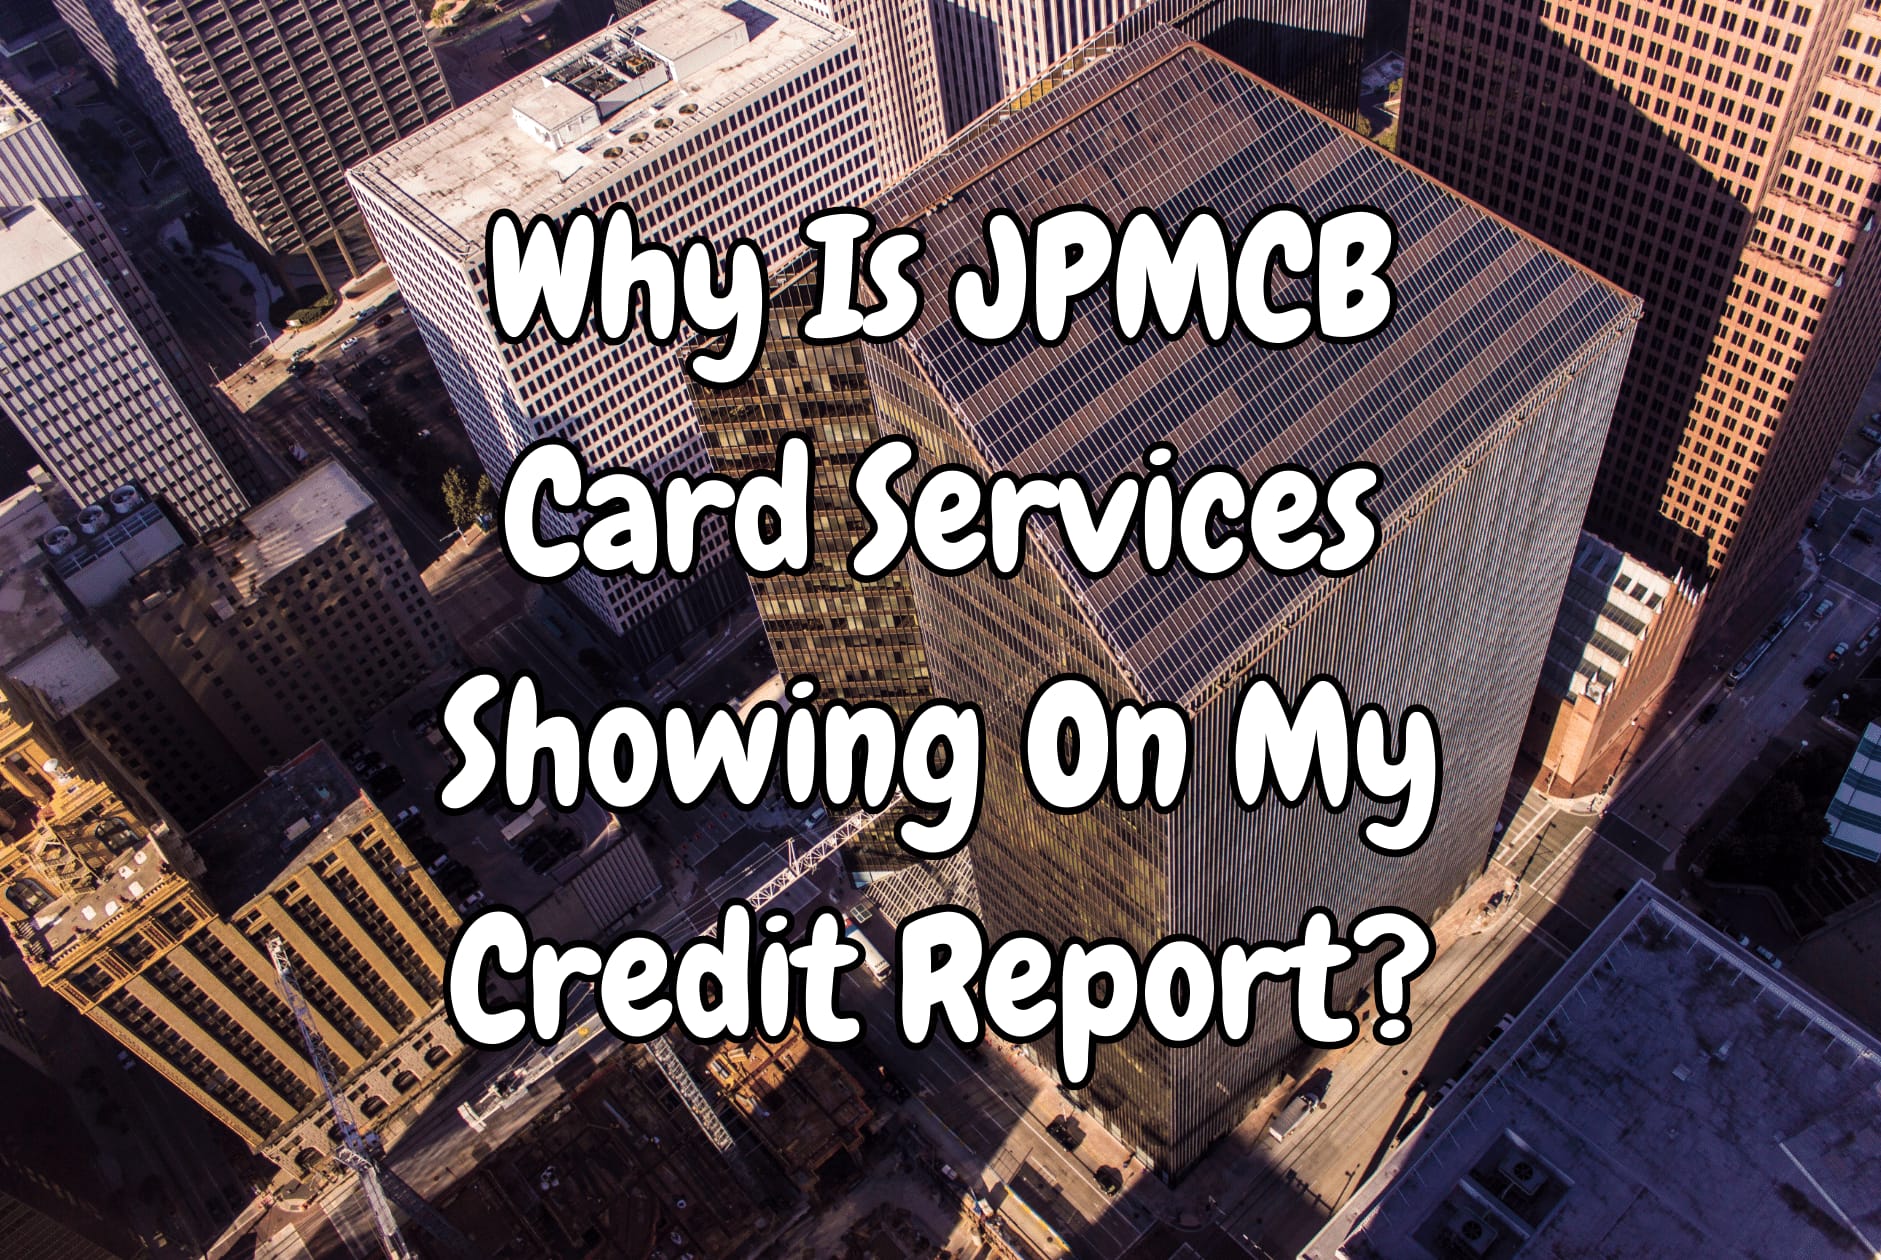 jpmcb who is and why its on credit reports